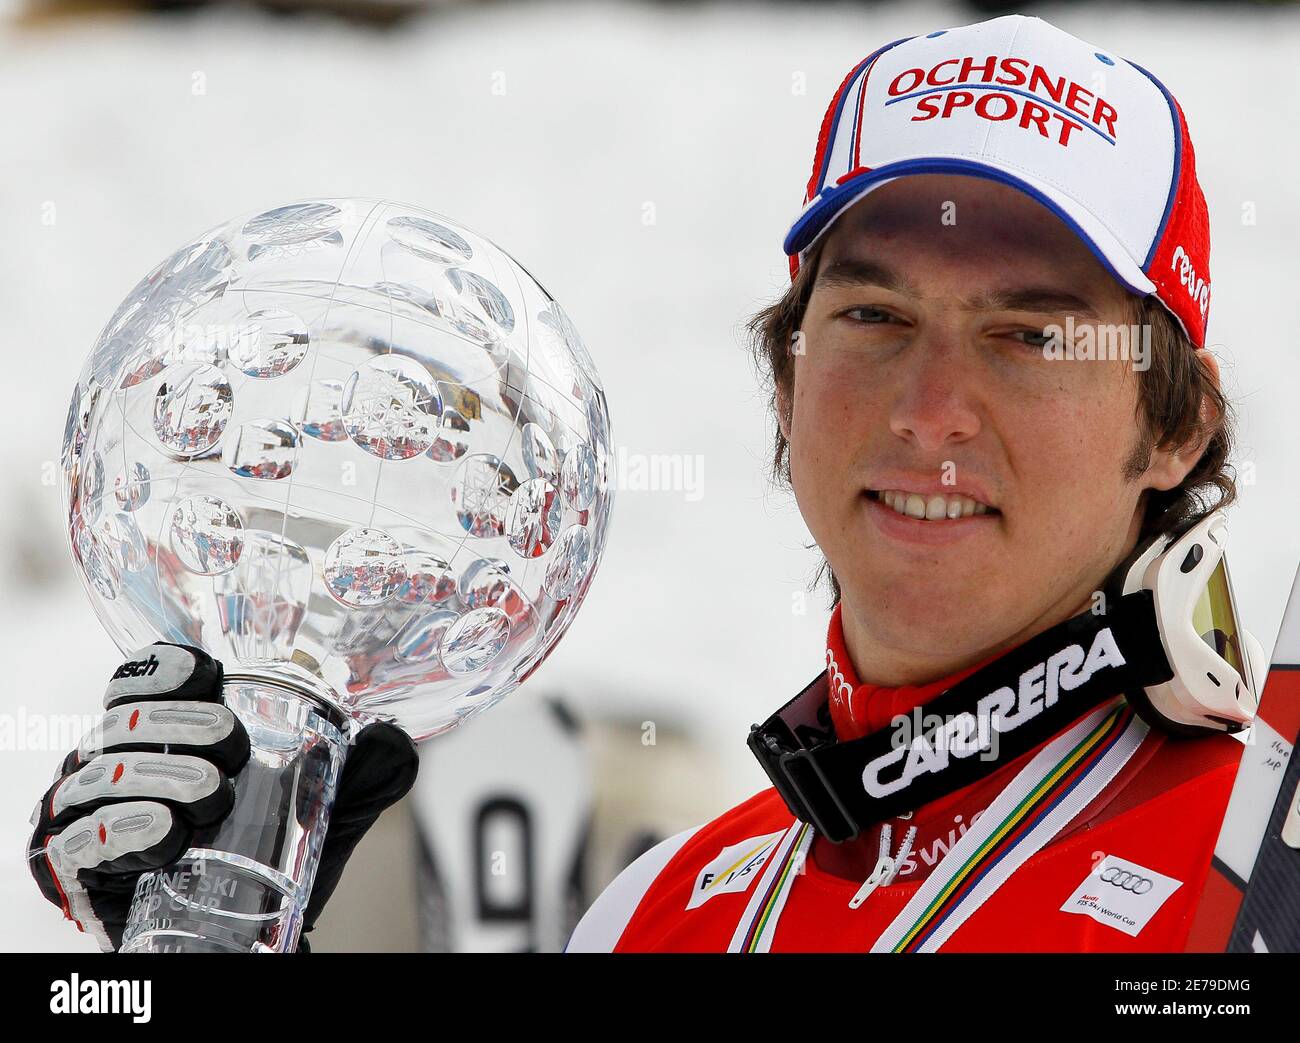 Carlo Janka of Switzerland poses with the men's overall Alpine Skiing World Cup trophy in Garmisch-Partenkirchen March 13, 2010.  REUTERS/Miro Kuzmanovic (GERMANY - Tags: SPORT SKIING) Stock Photo